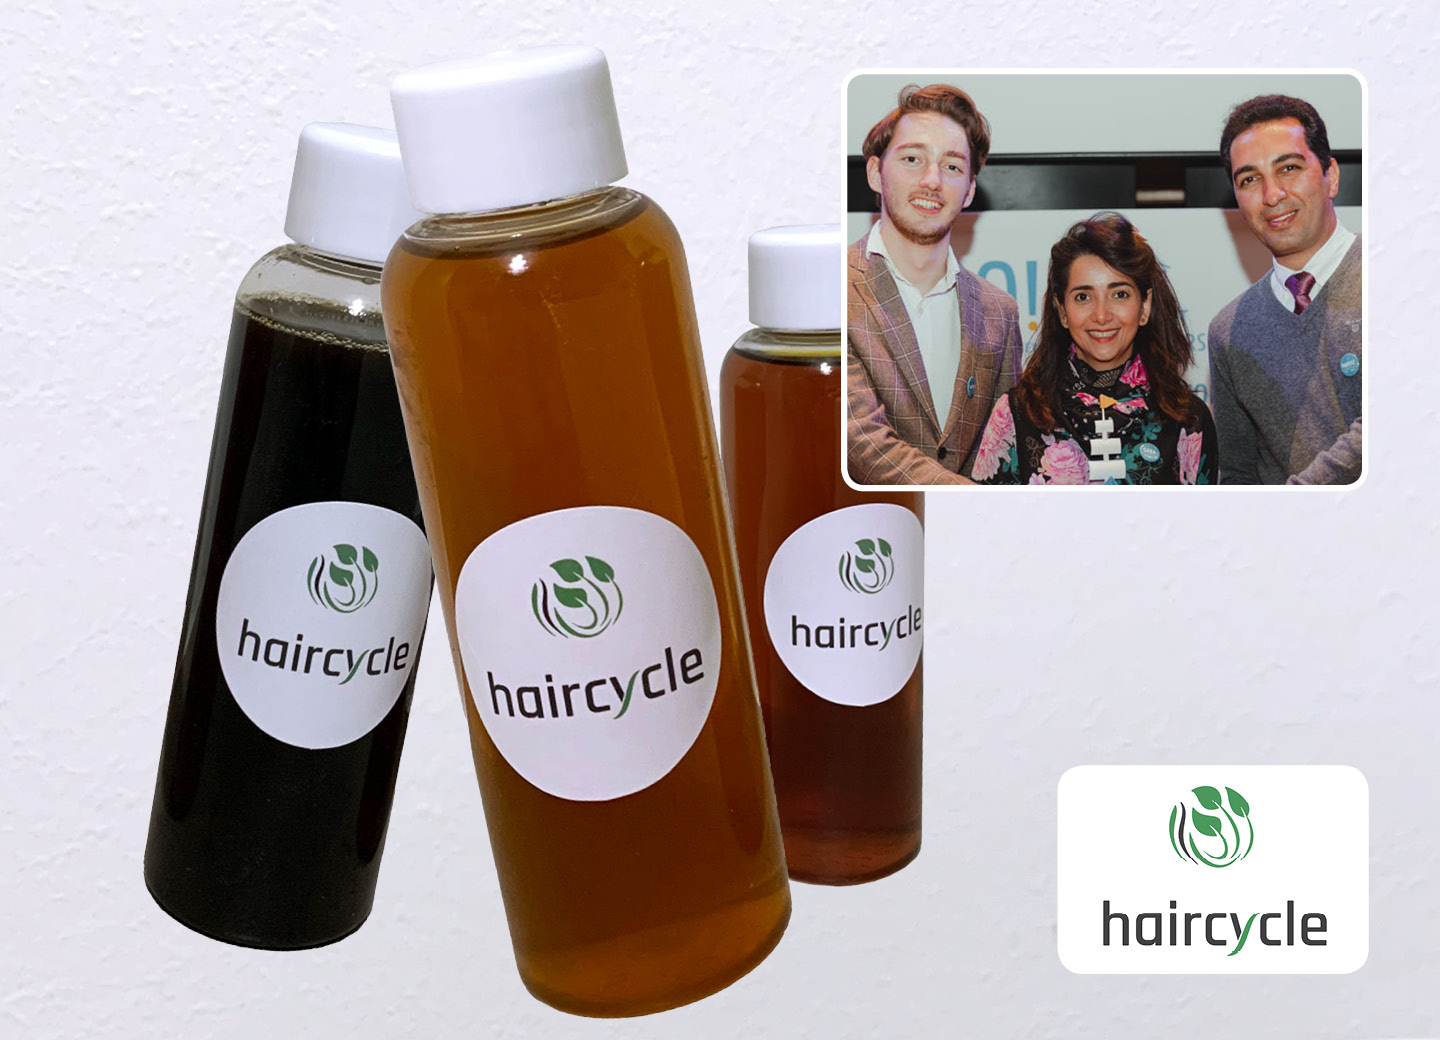 Haircycle vignette